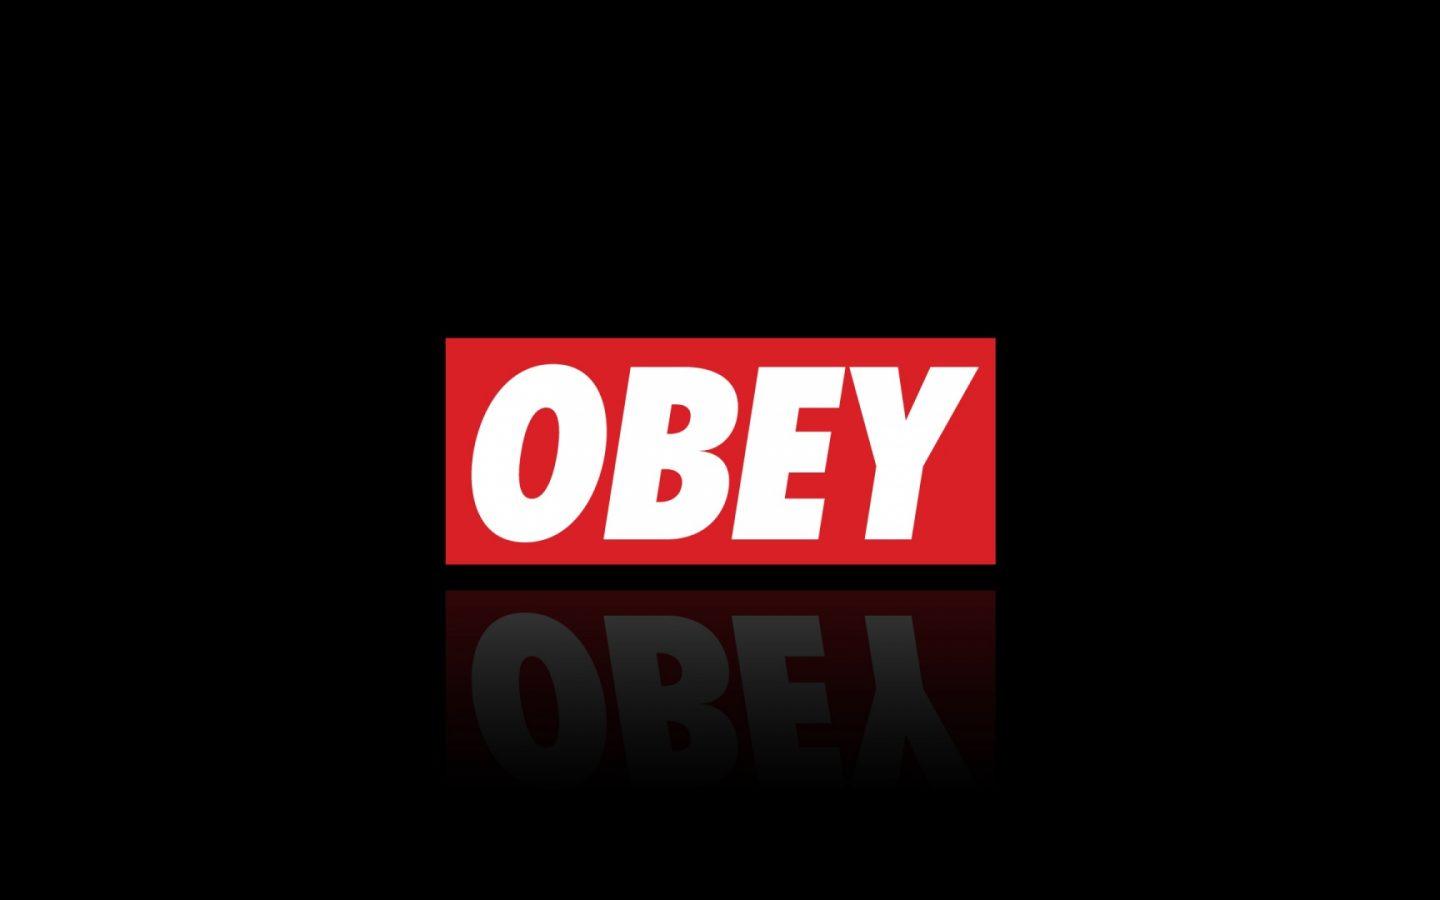 The Obey Logo - Obey Logo Wallpaper | PaperPull